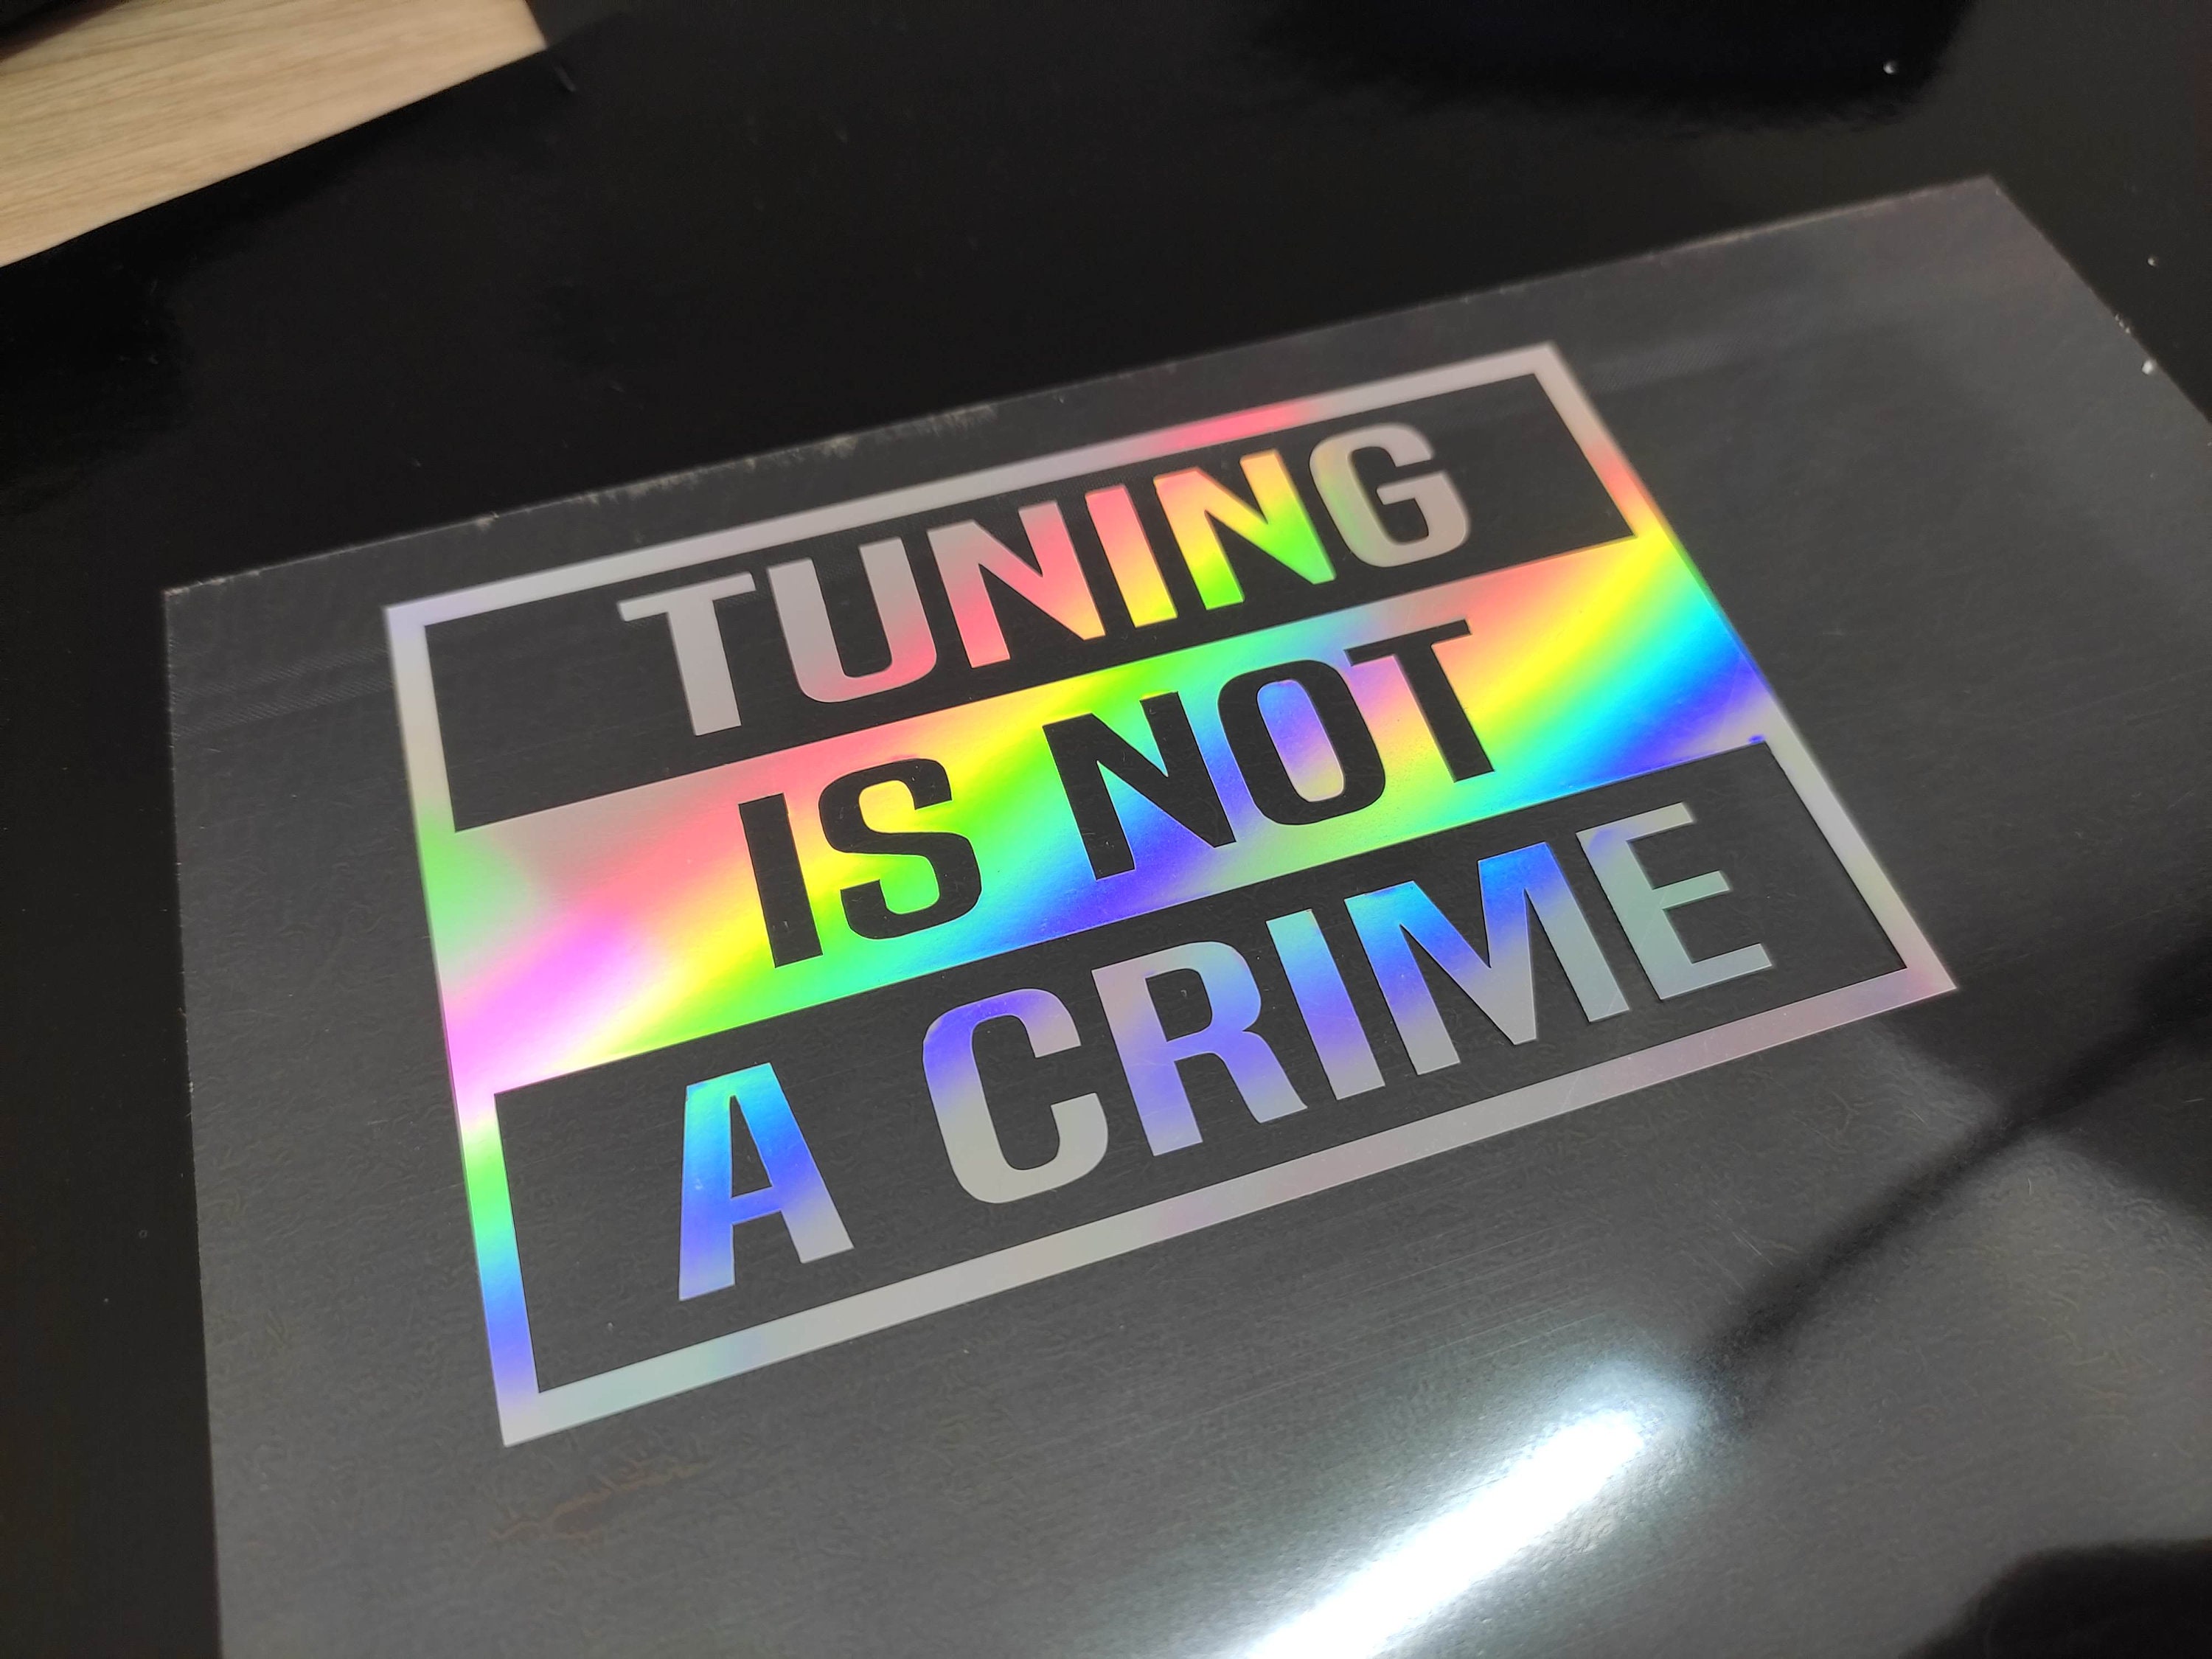 Autoaufkleber - tuning is not a crime